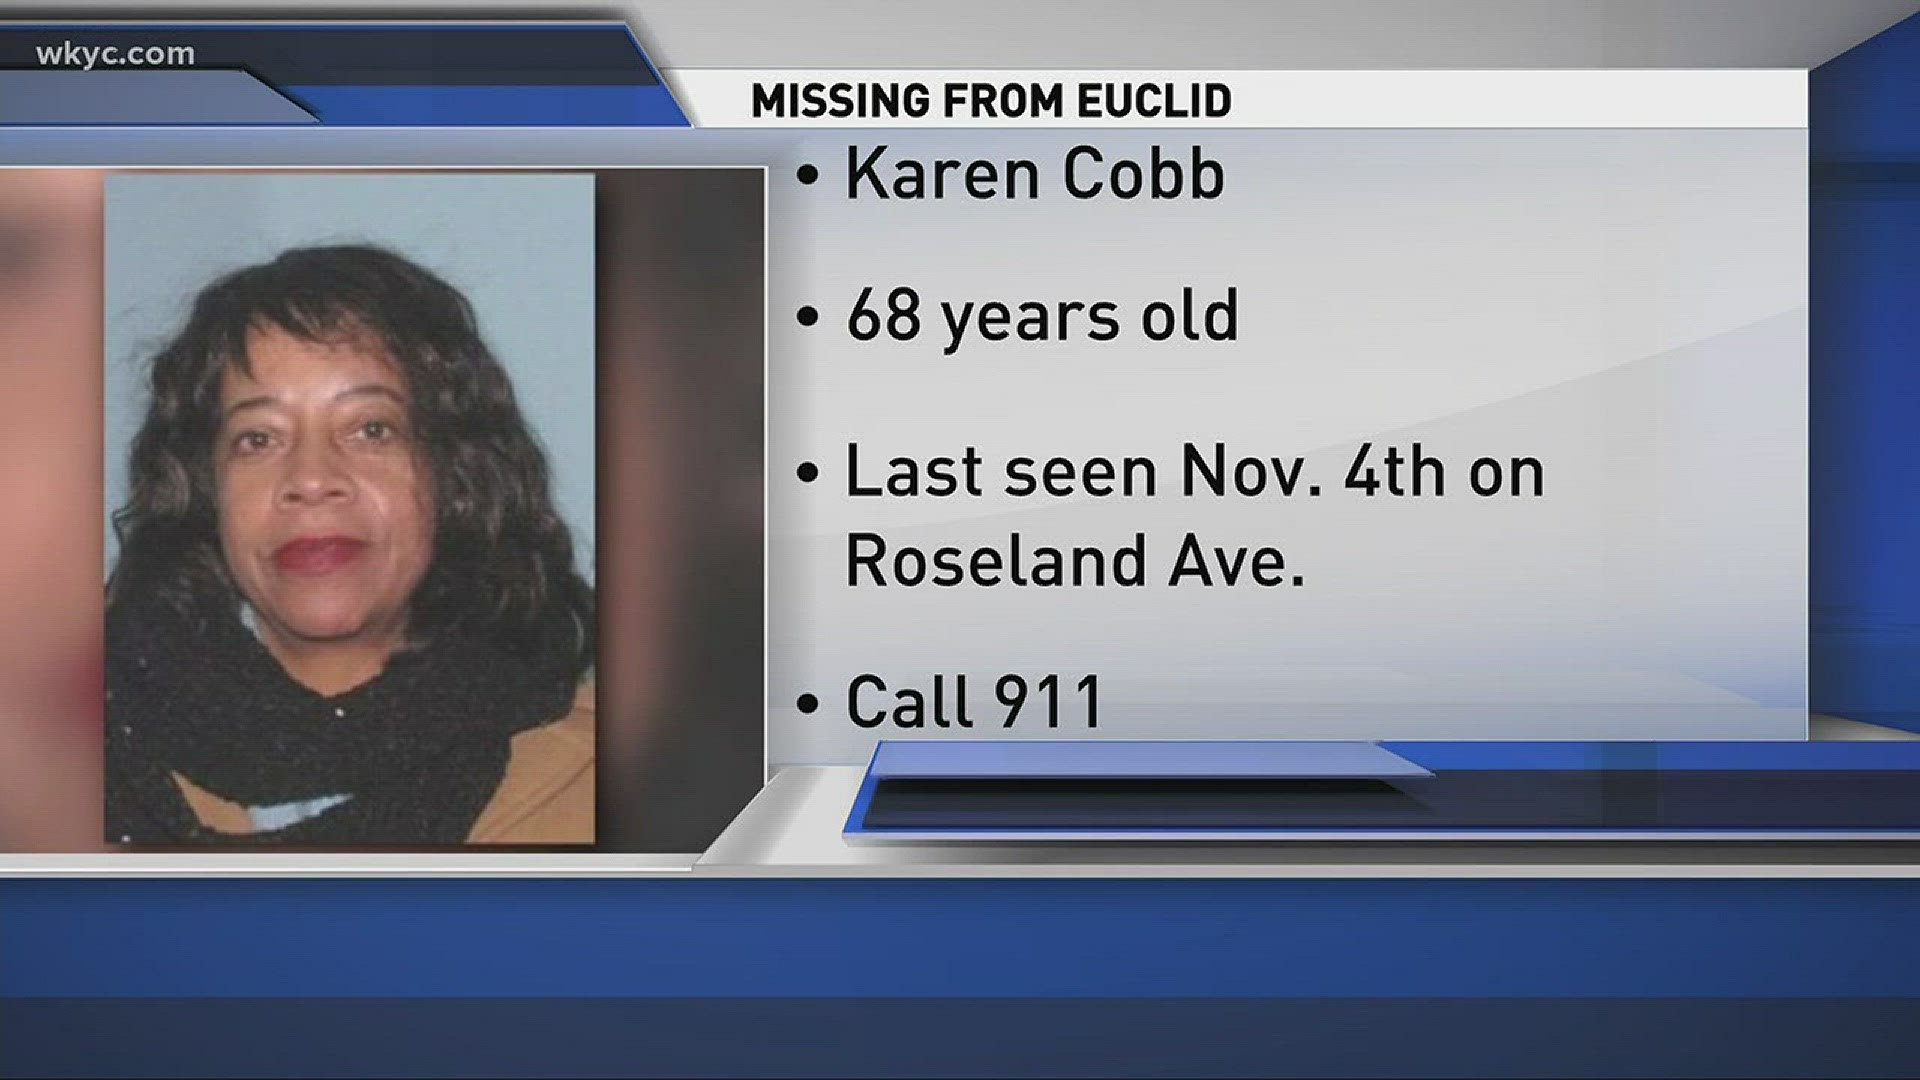 Jan. 8, 2018: Authorities say 68-year-old Karen Cobb was last seen by relatives on Nov. 4. That's why an endangered missing adult alert is in effect.